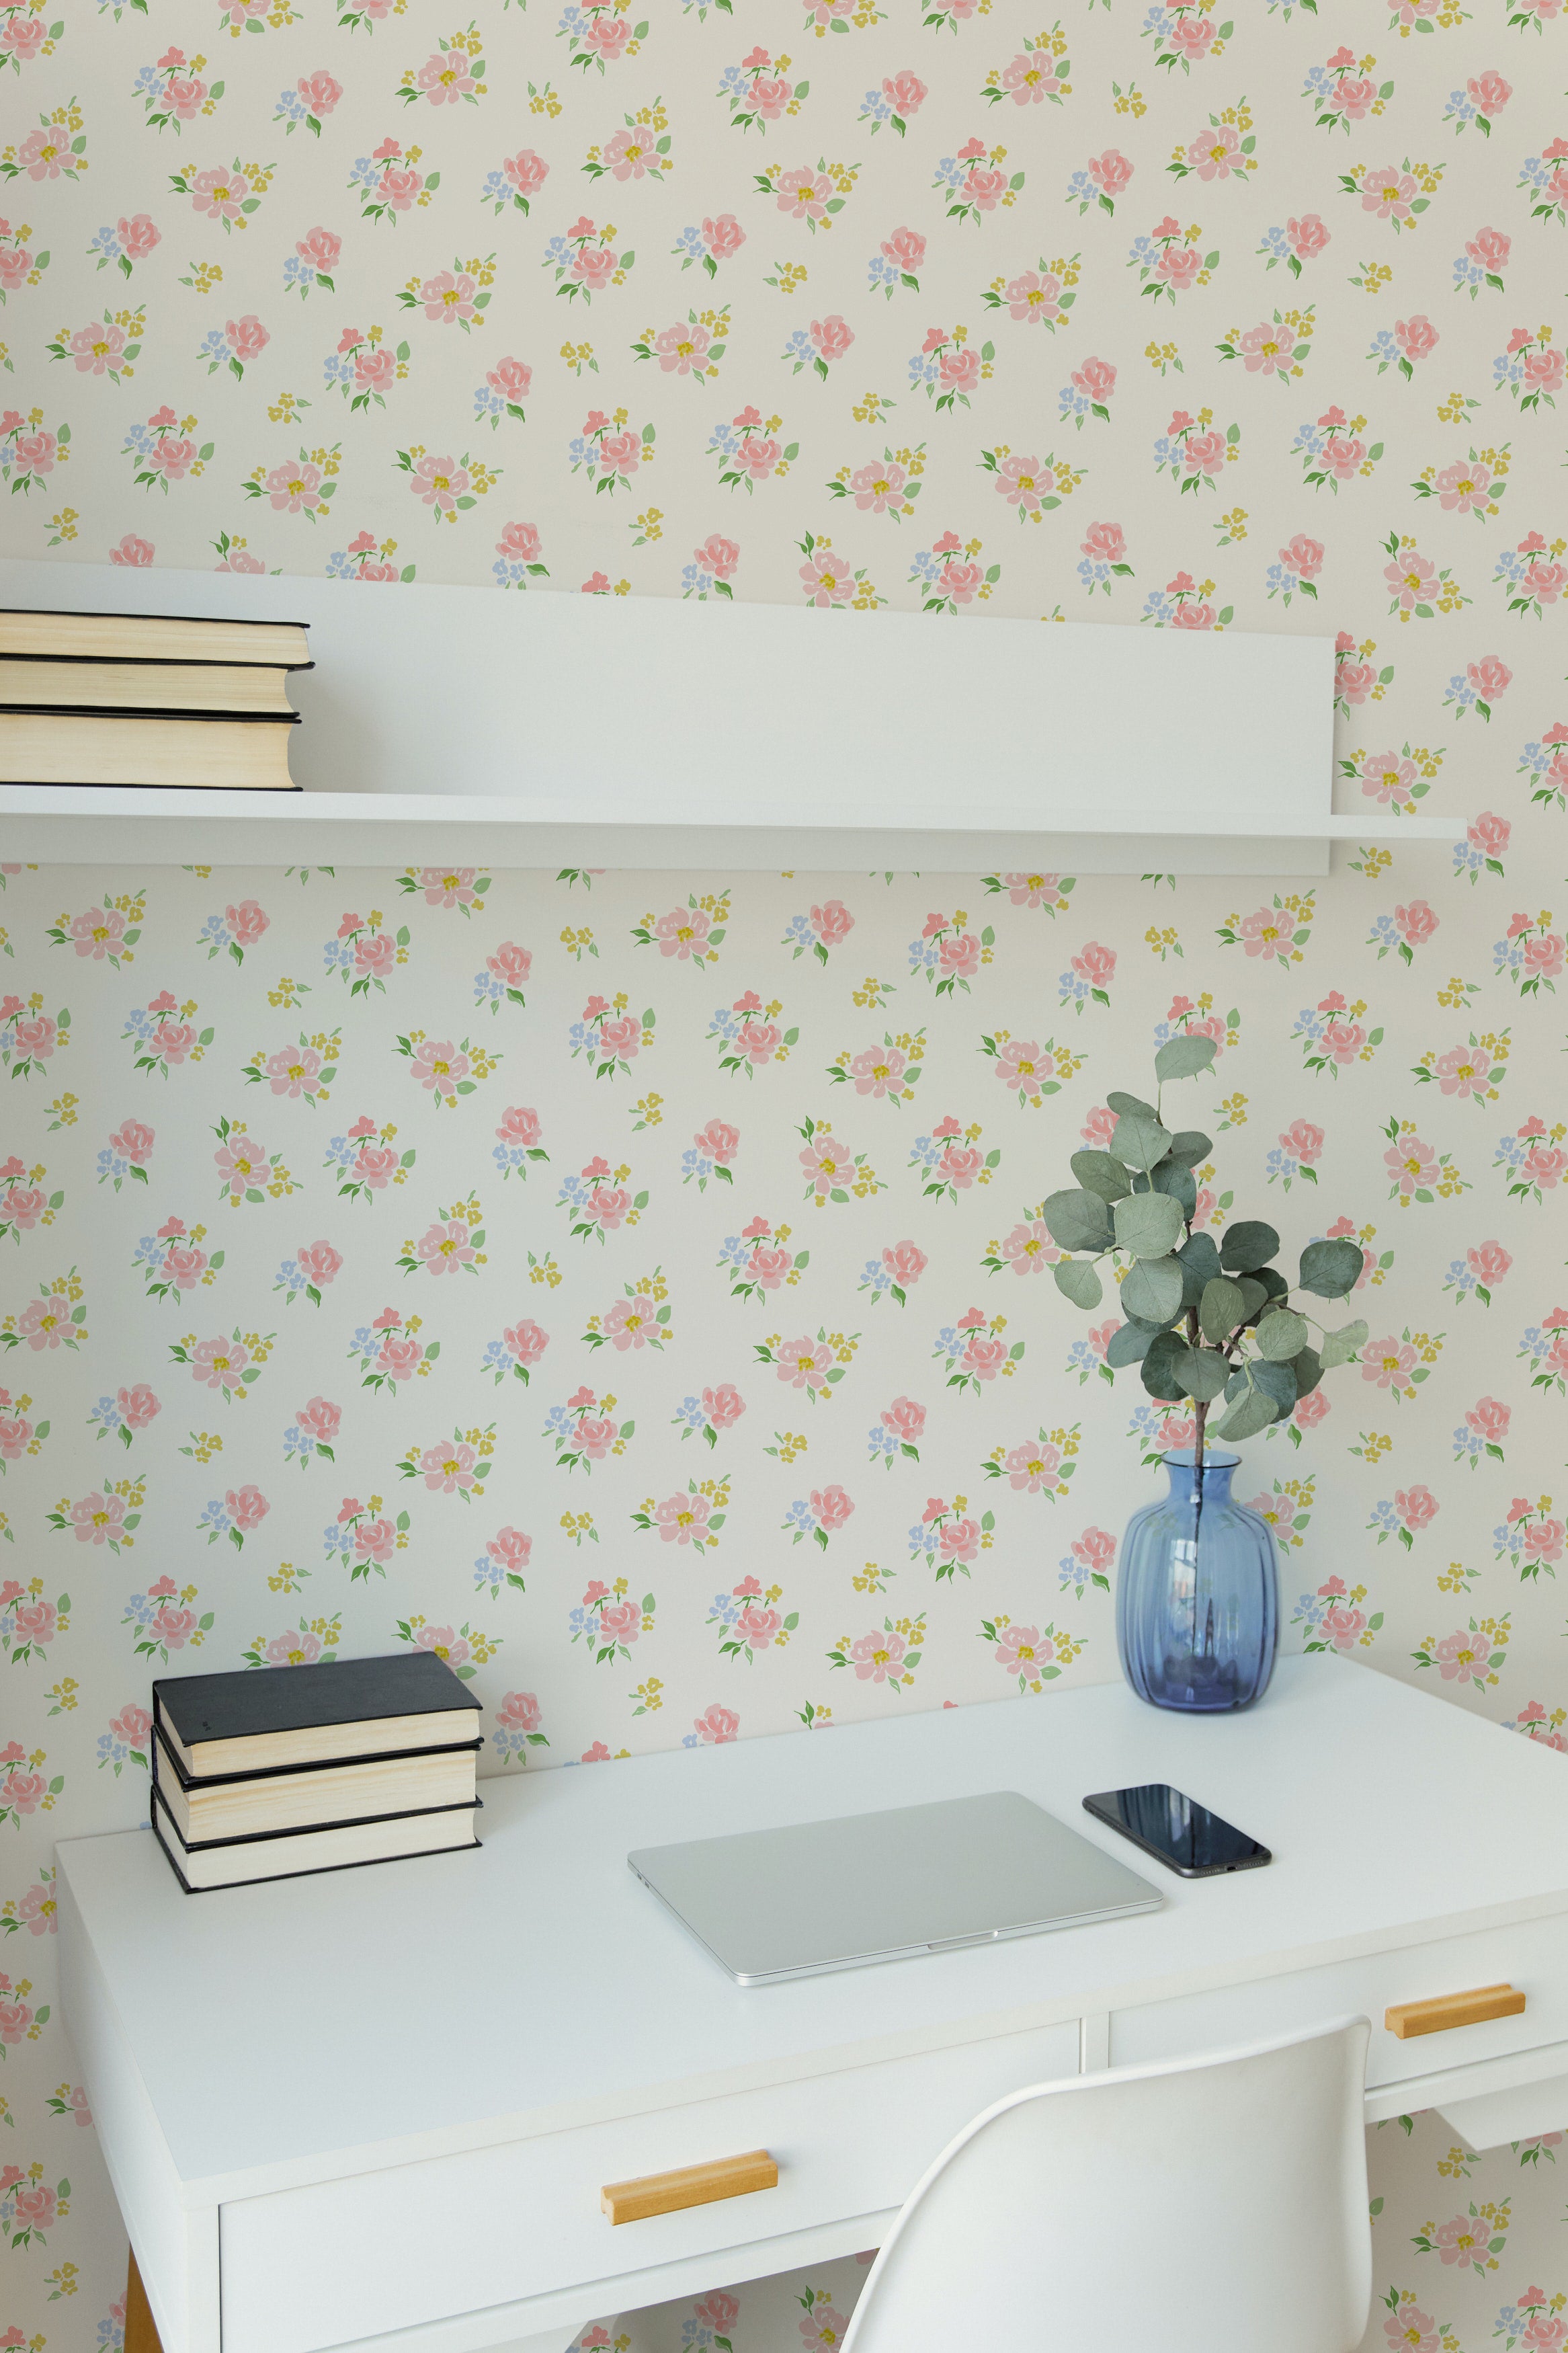 A modern workspace featuring the Rōma Hito Wallpaper, decorated with a delicate pattern of small pink and blue roses scattered across a light cream background. The scene includes a white desk with books and a blue vase with greenery, creating a fresh and inviting work environment.